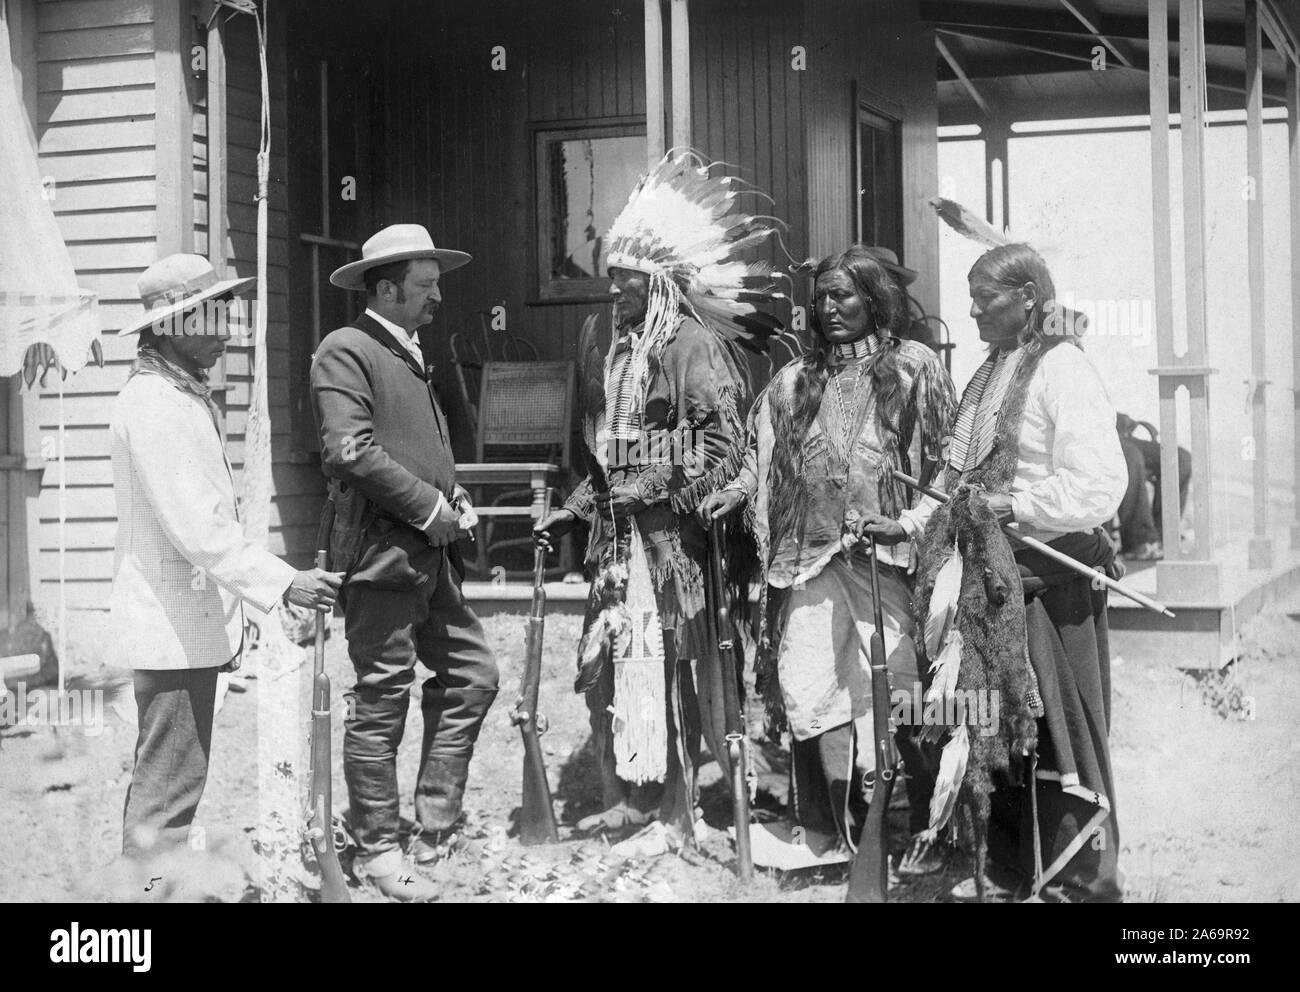 Three Cheyenne men wearing ceremonial clothing and holding rifles, greeting a white man in a suit and his interpreter in front of a building. Stock Photo